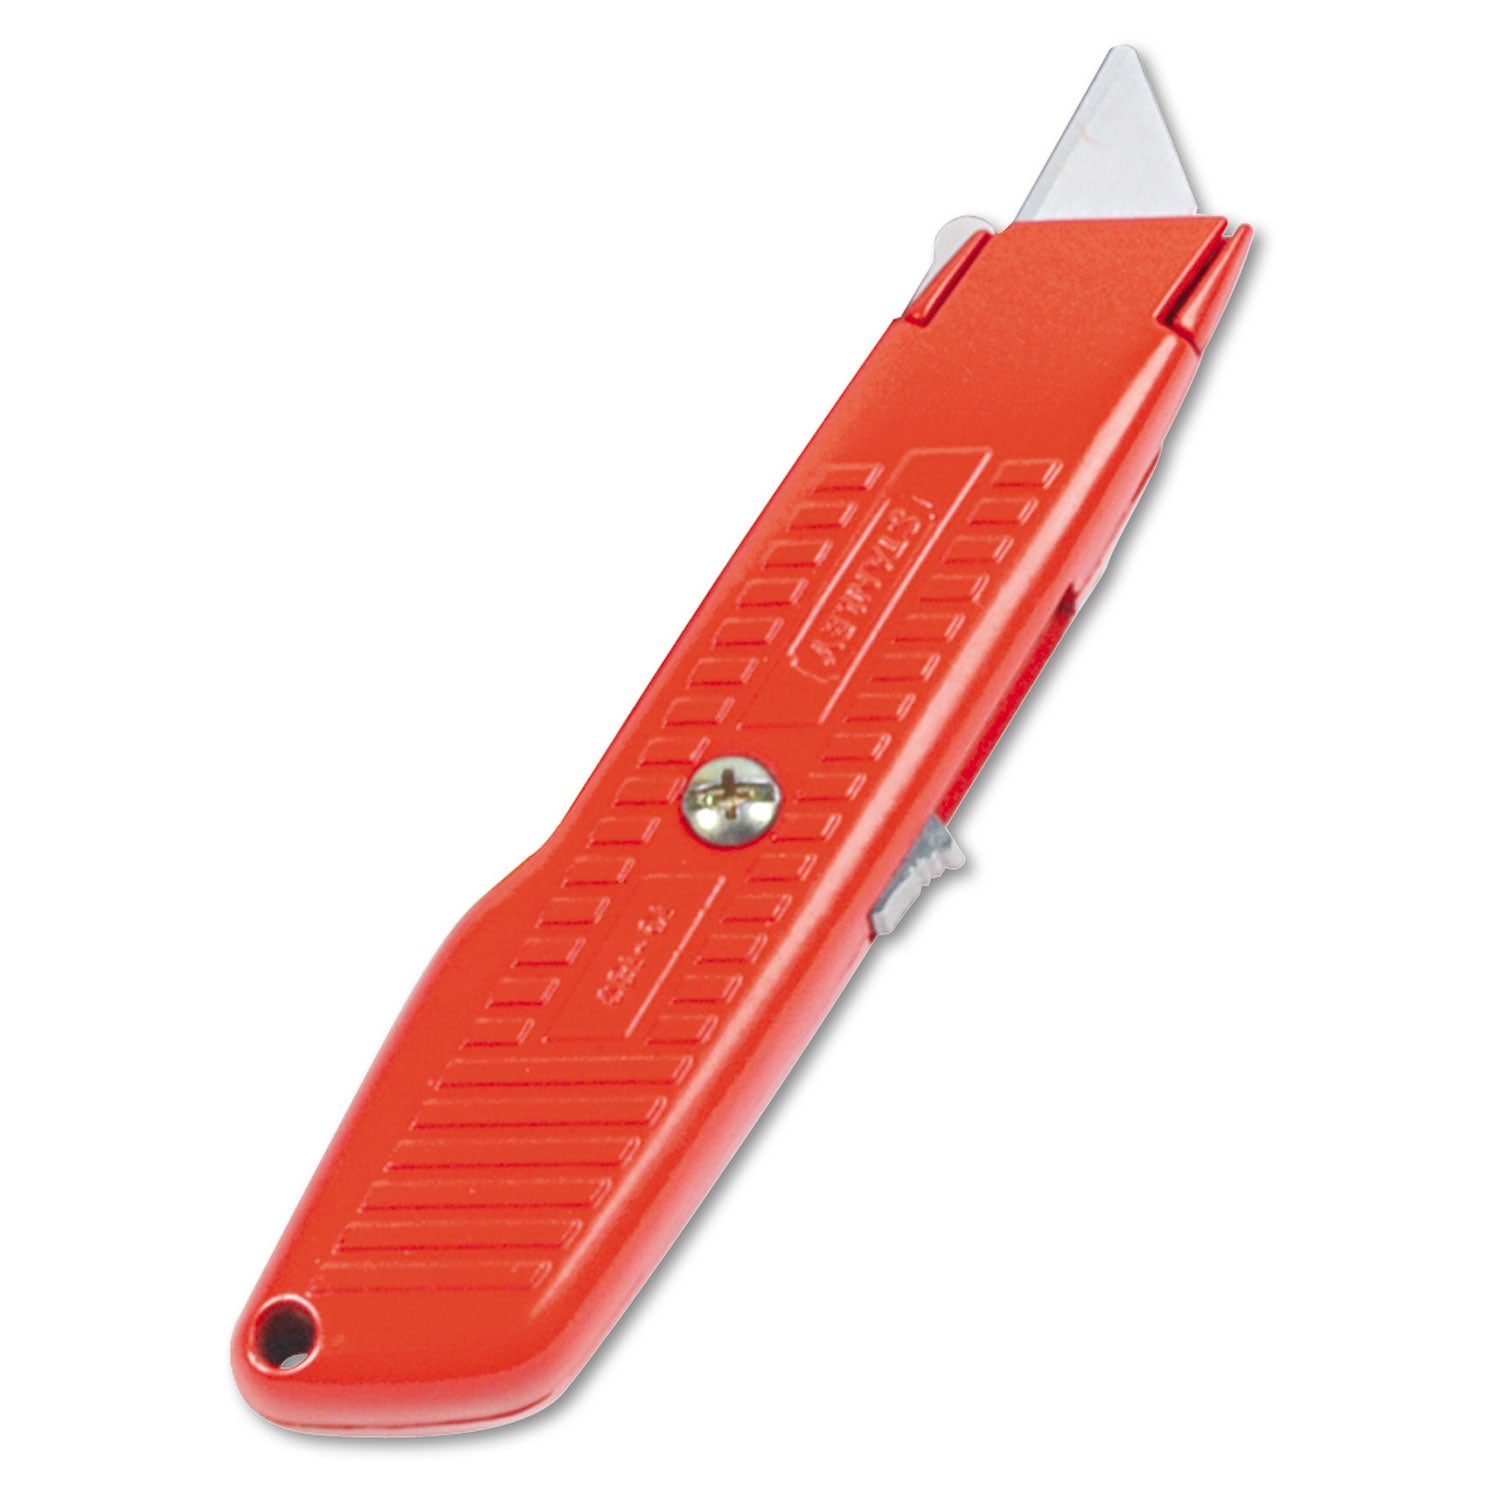 Interlock Safety Utility Knife with Self-Retracting Round Point Blade, 5.63" Metal Handle, Red Orange - 